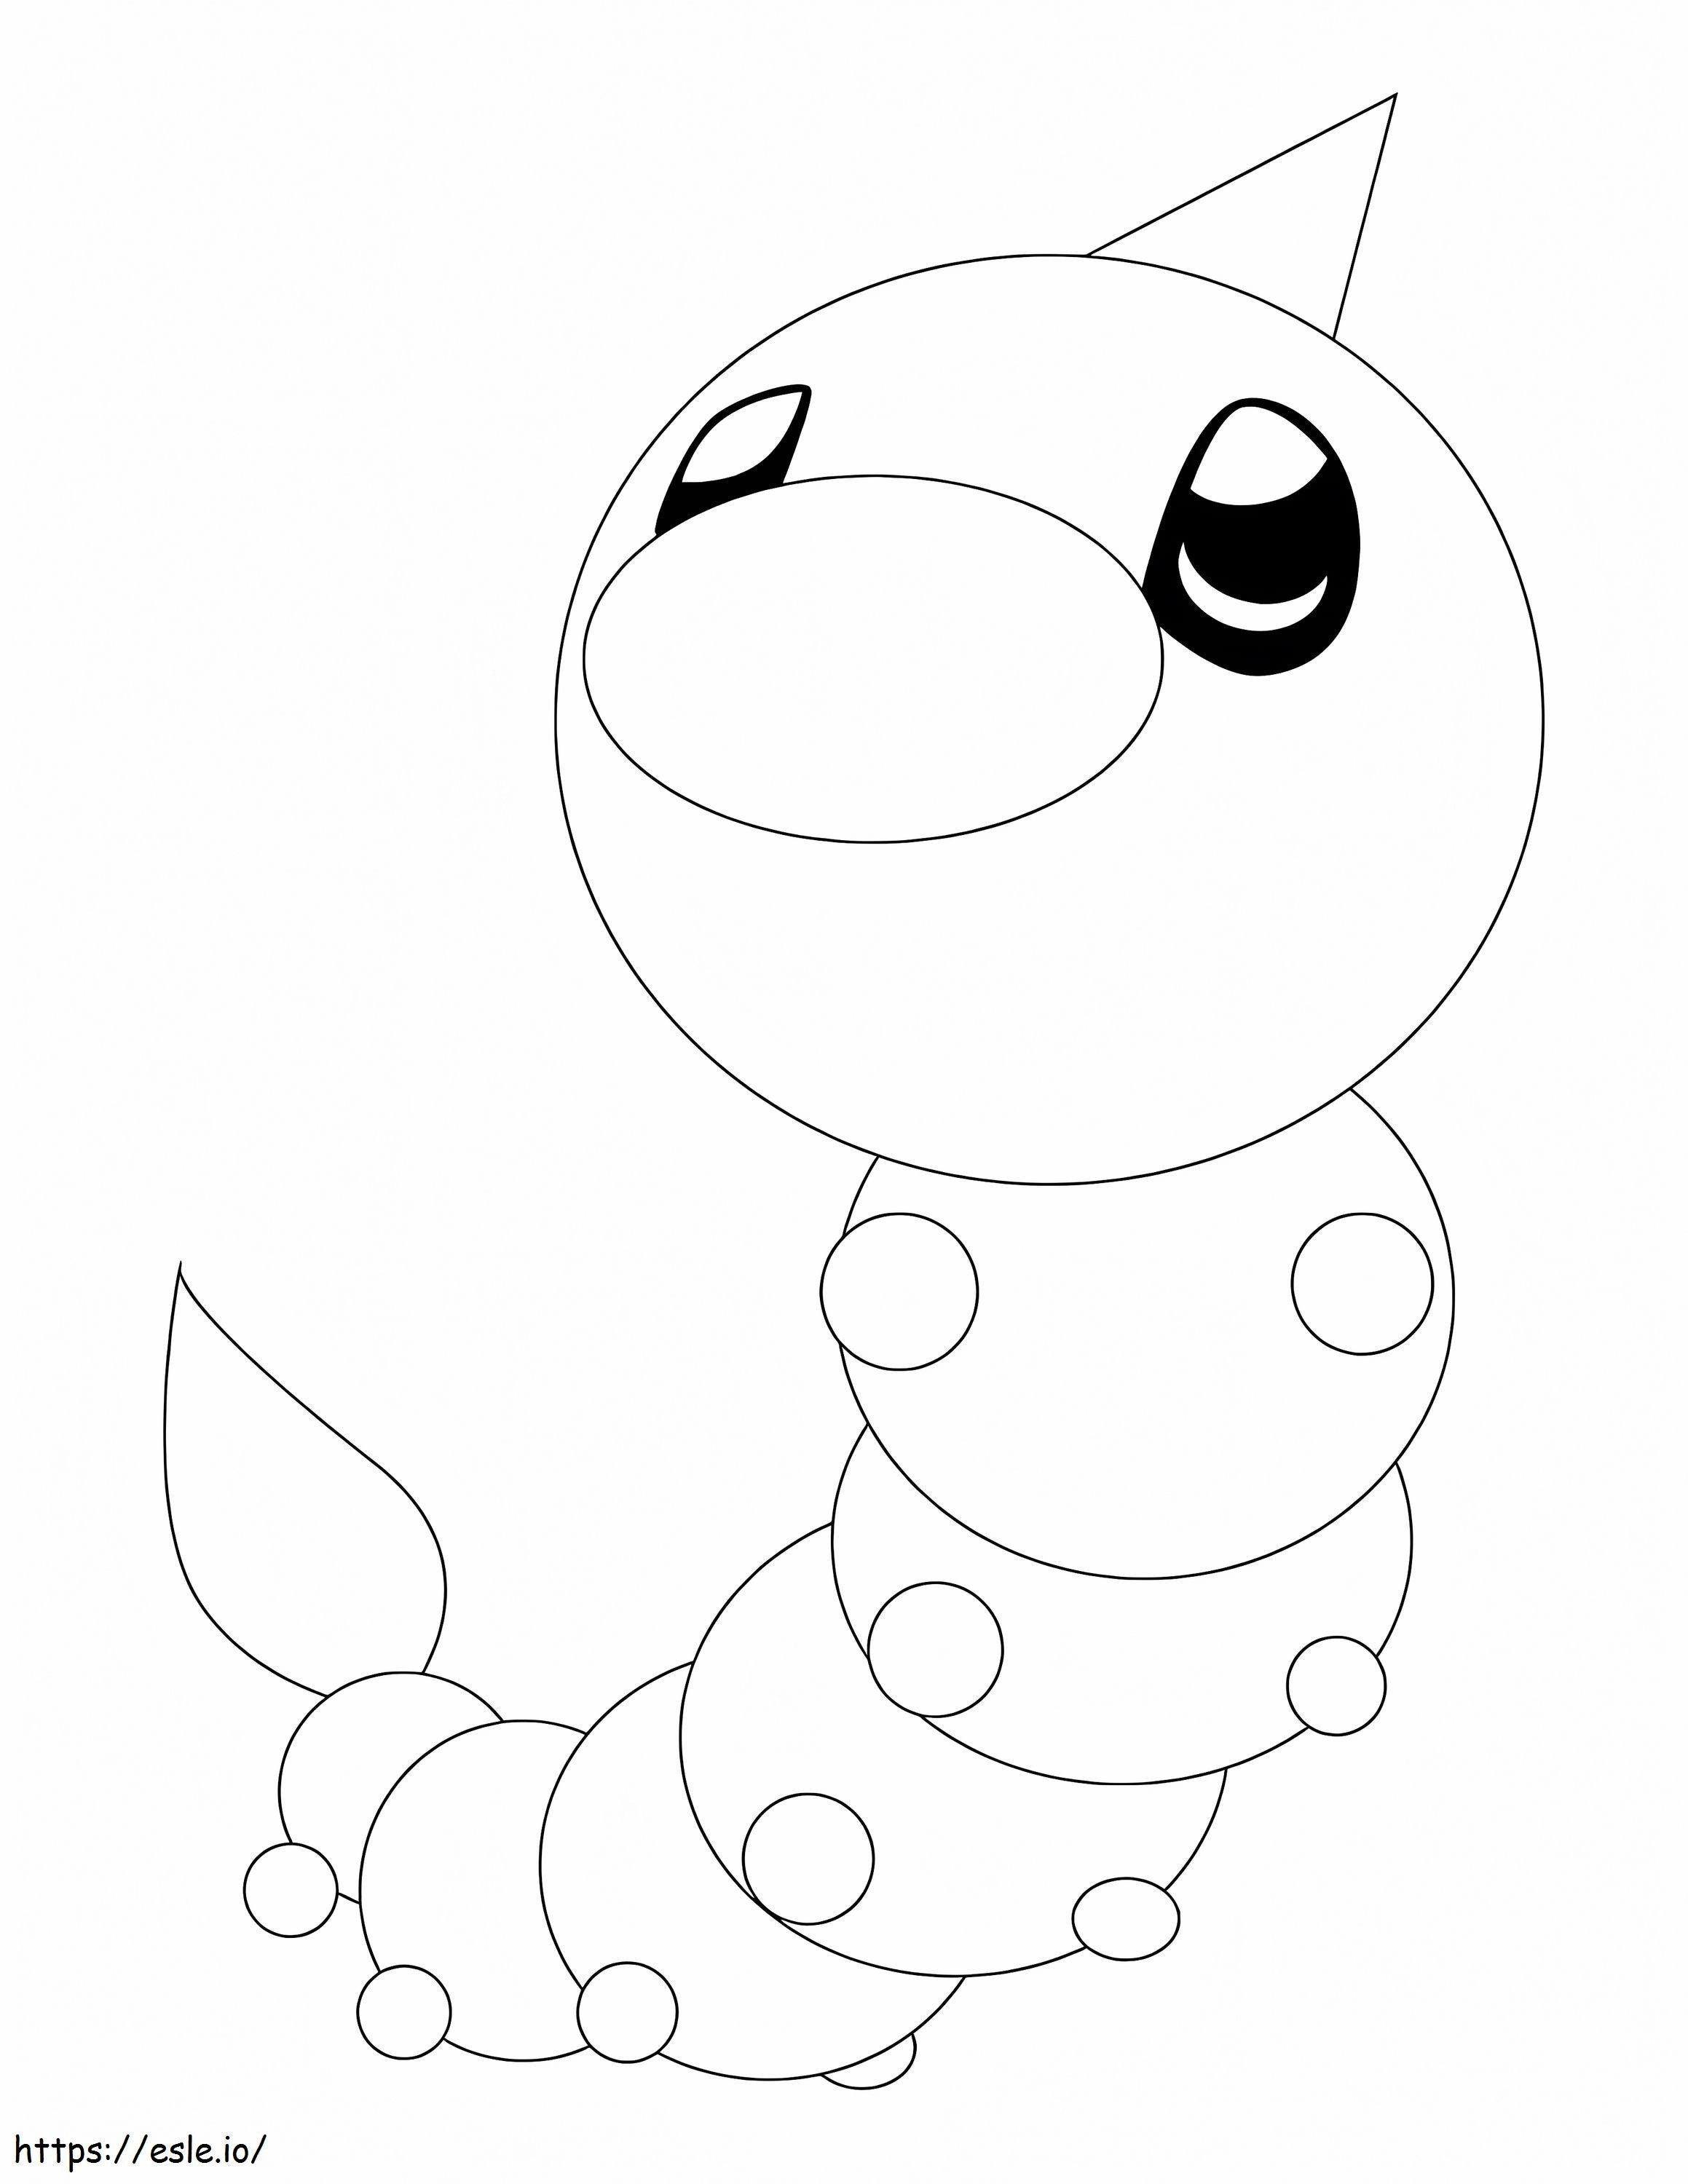 Weedle 1 coloring page